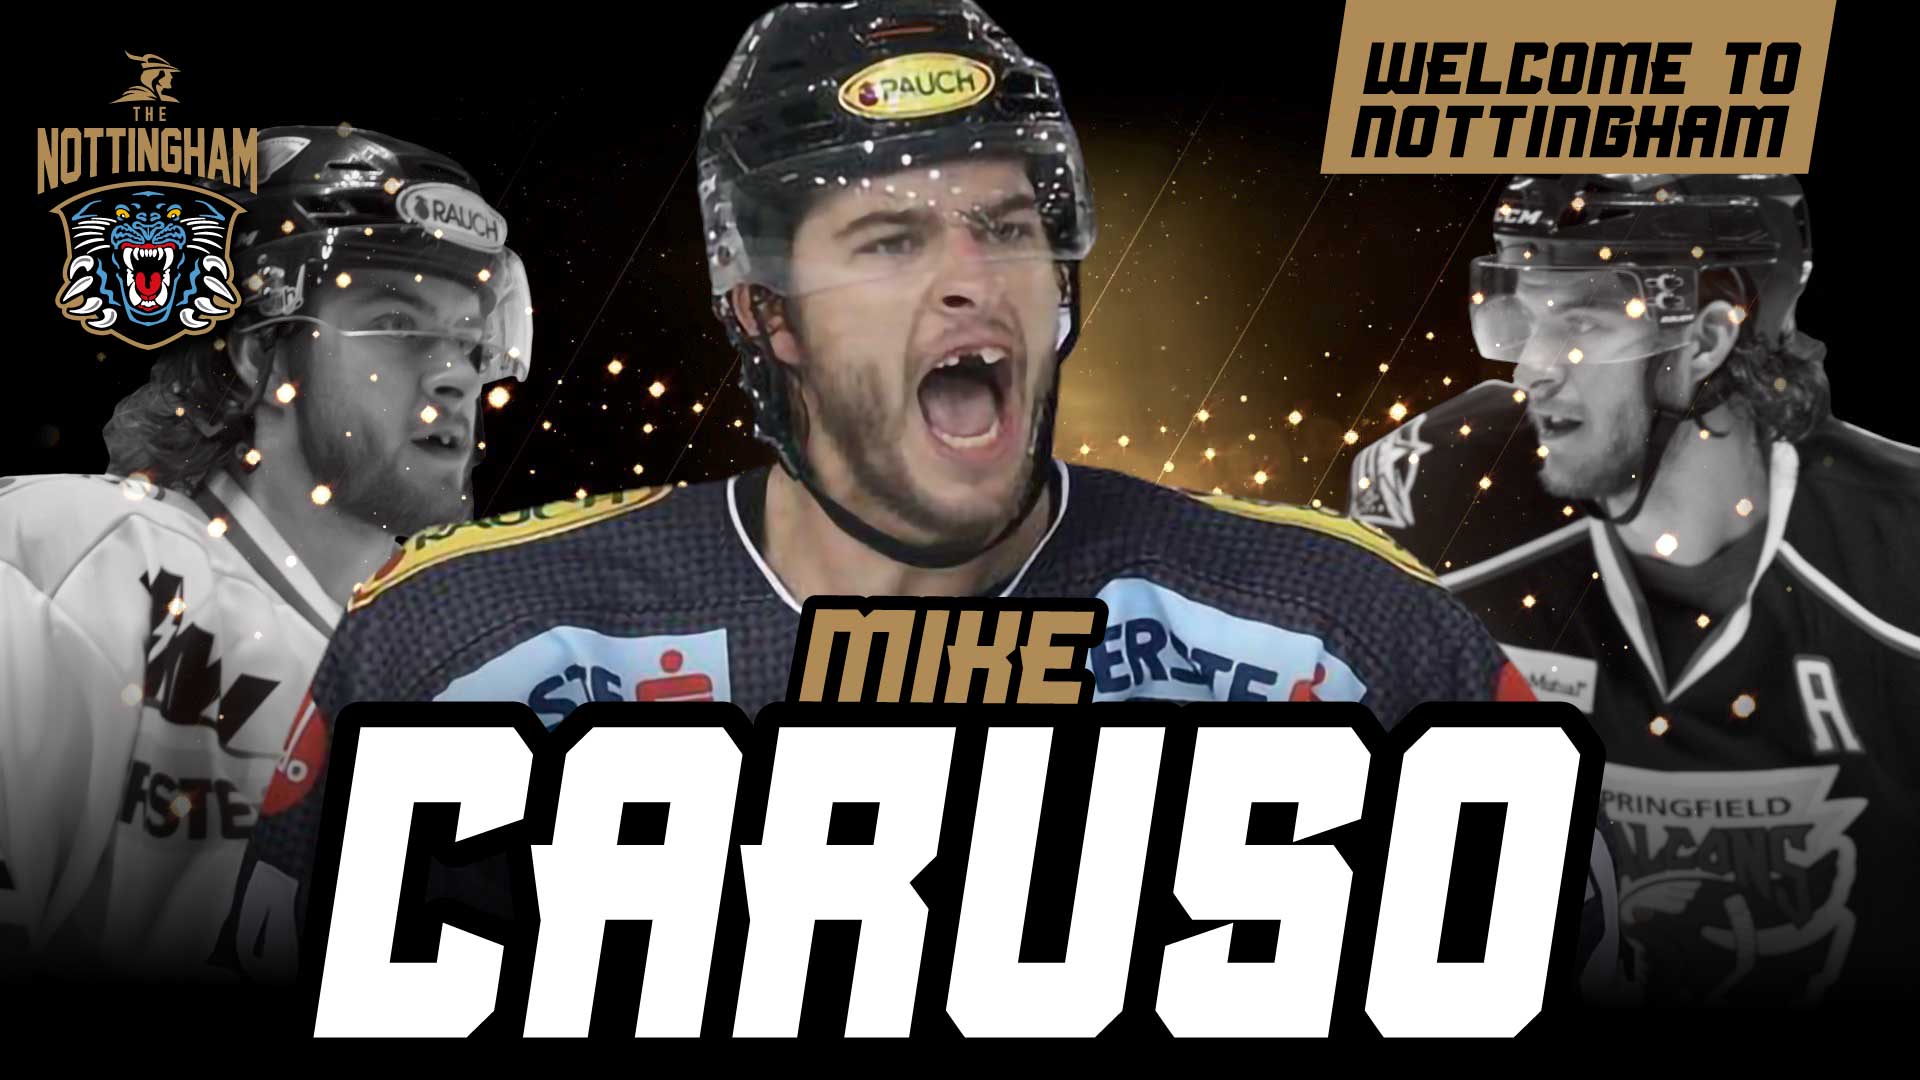 220714 | Caruso Signs Top Image